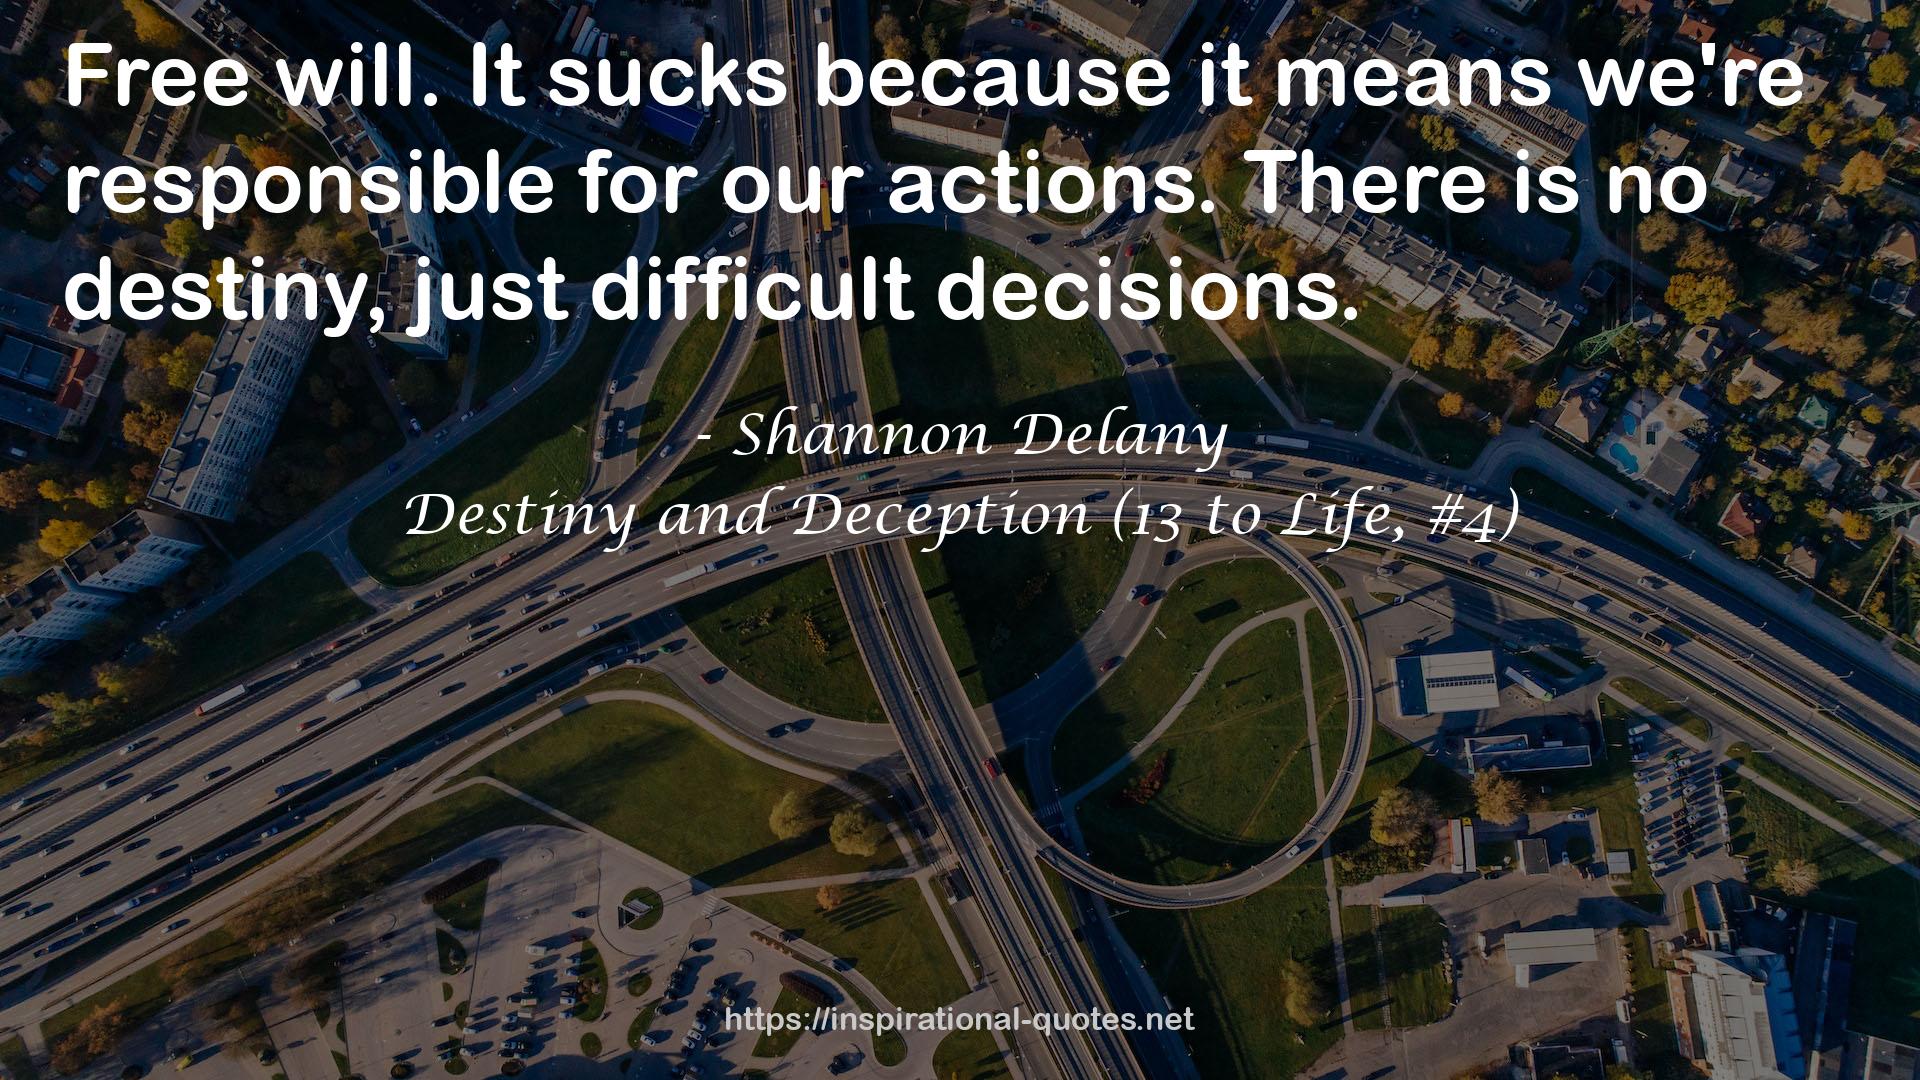 Destiny and Deception (13 to Life, #4) QUOTES